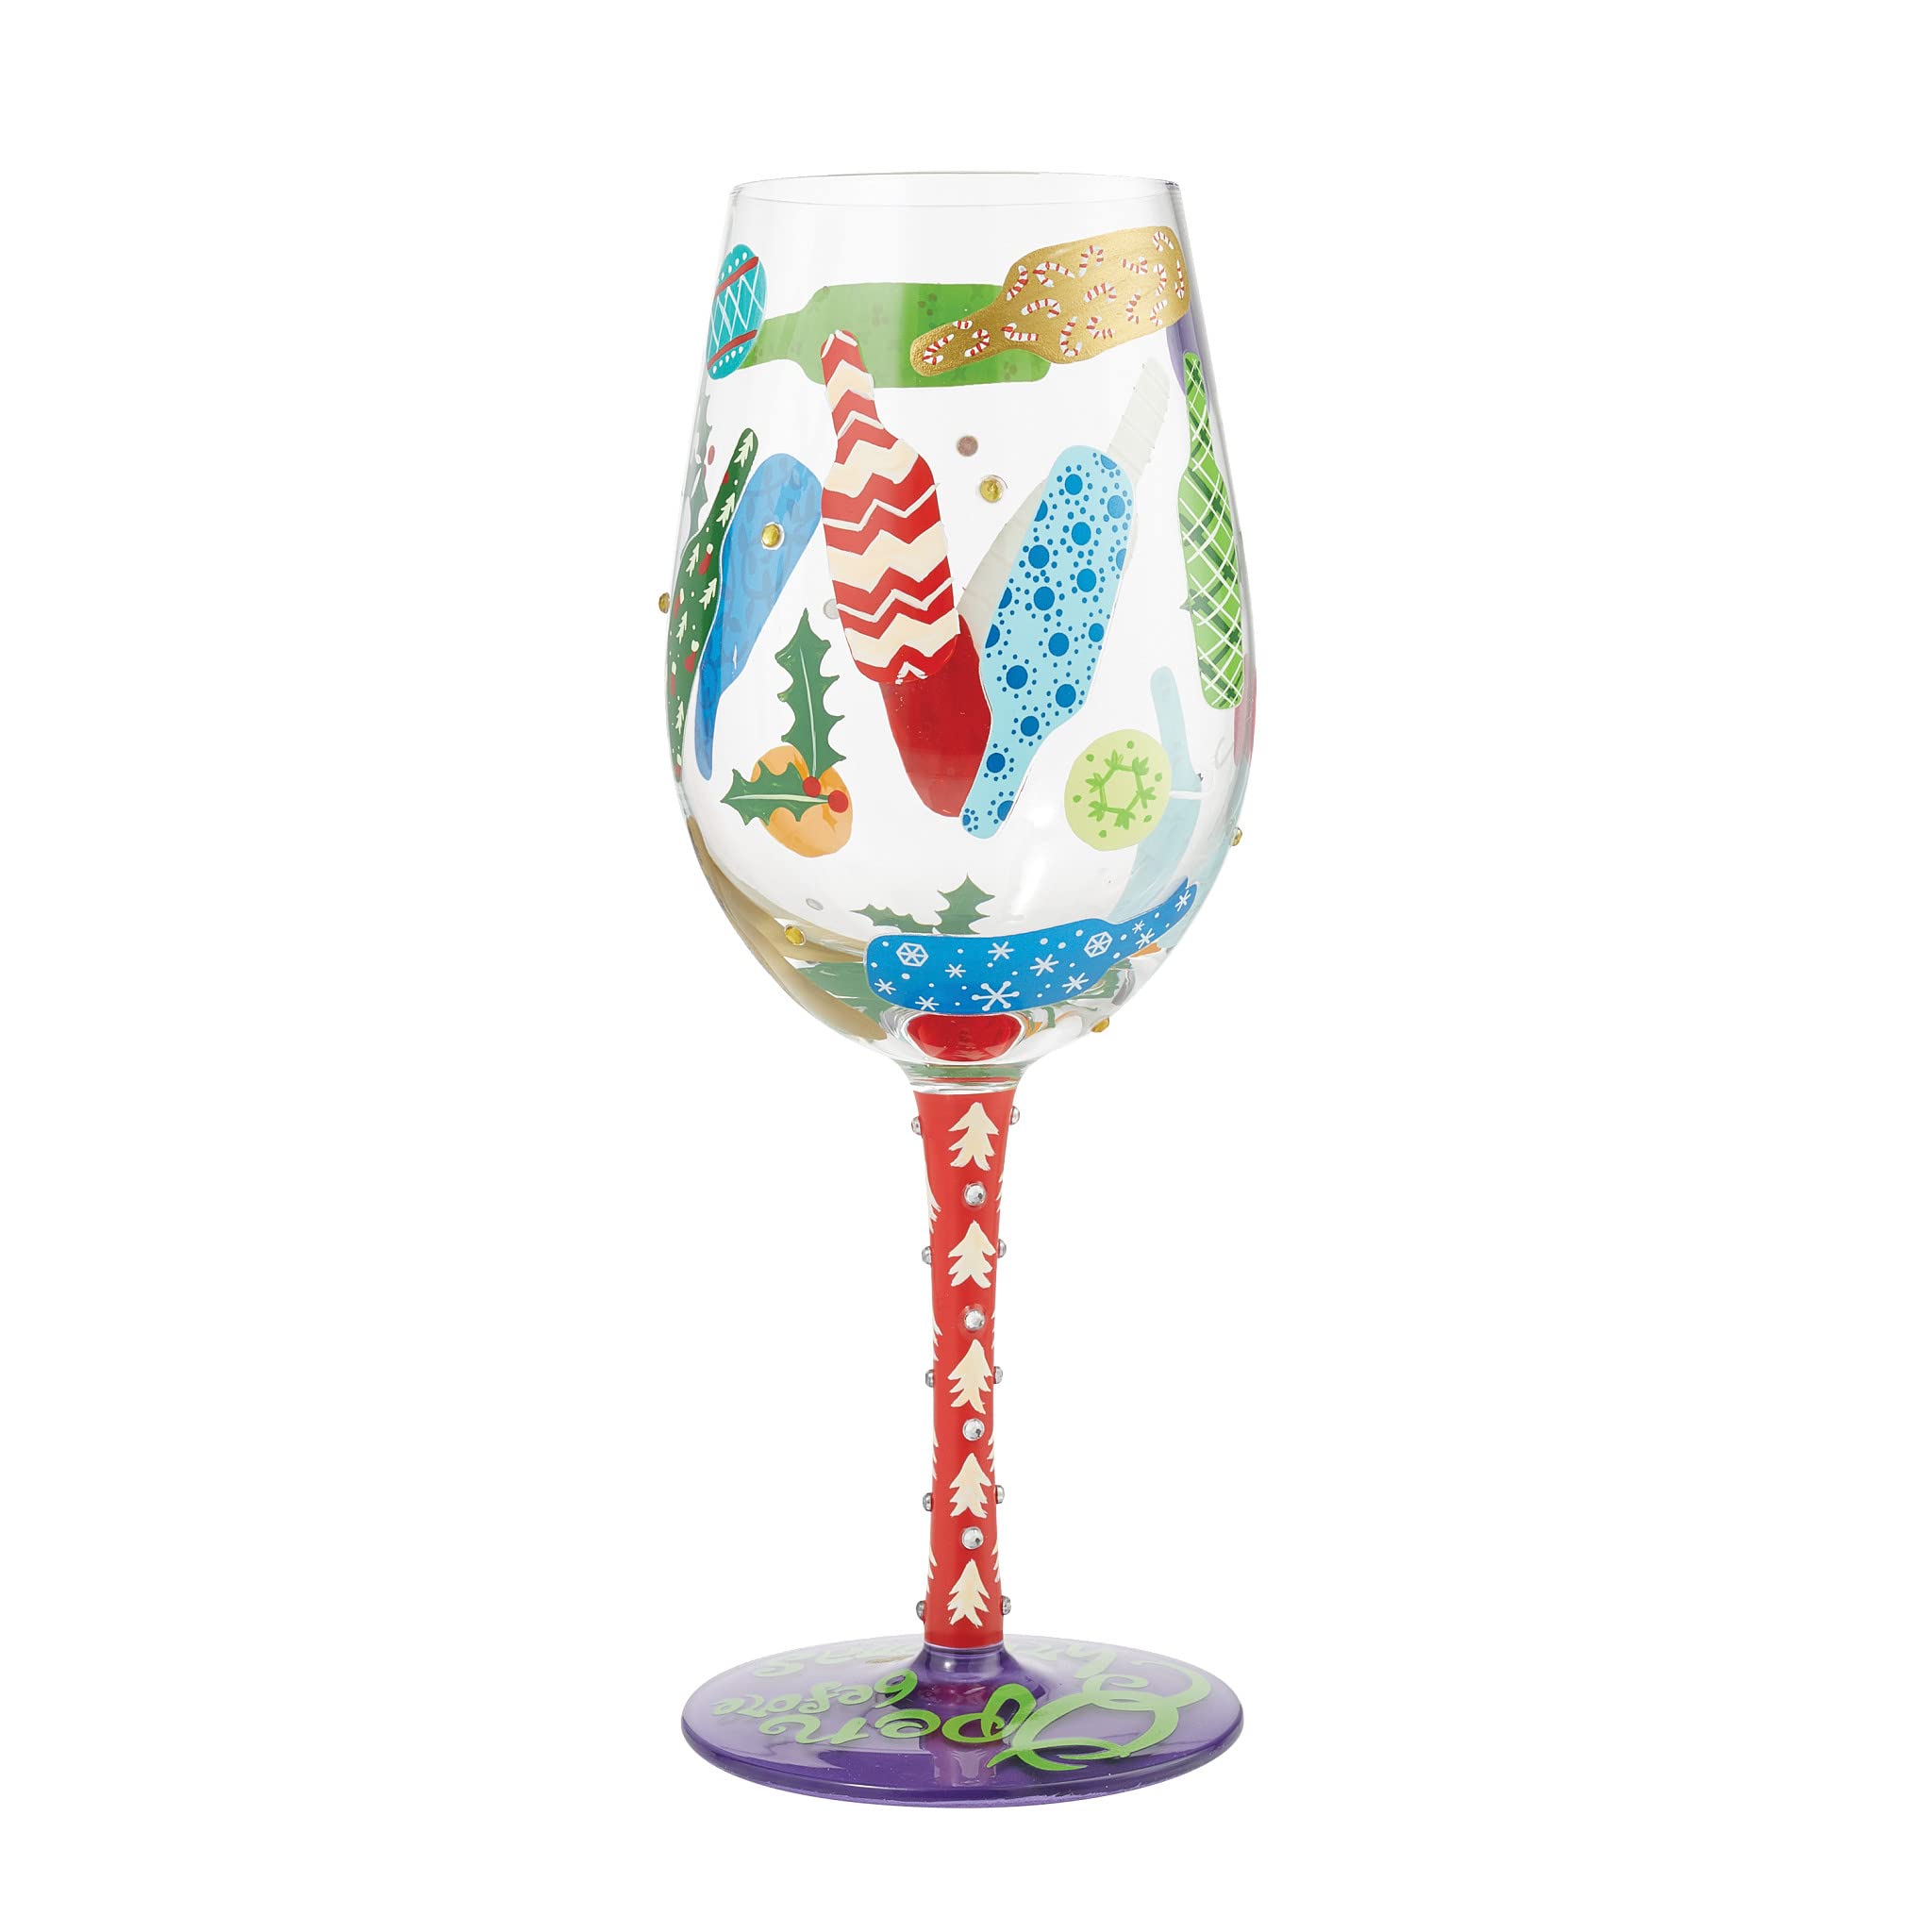 Enesco Designs by Lolita Holiday Open Before Christmas Hand-Painted Artisan Wine Glass, 15 Ounce, Multicolor